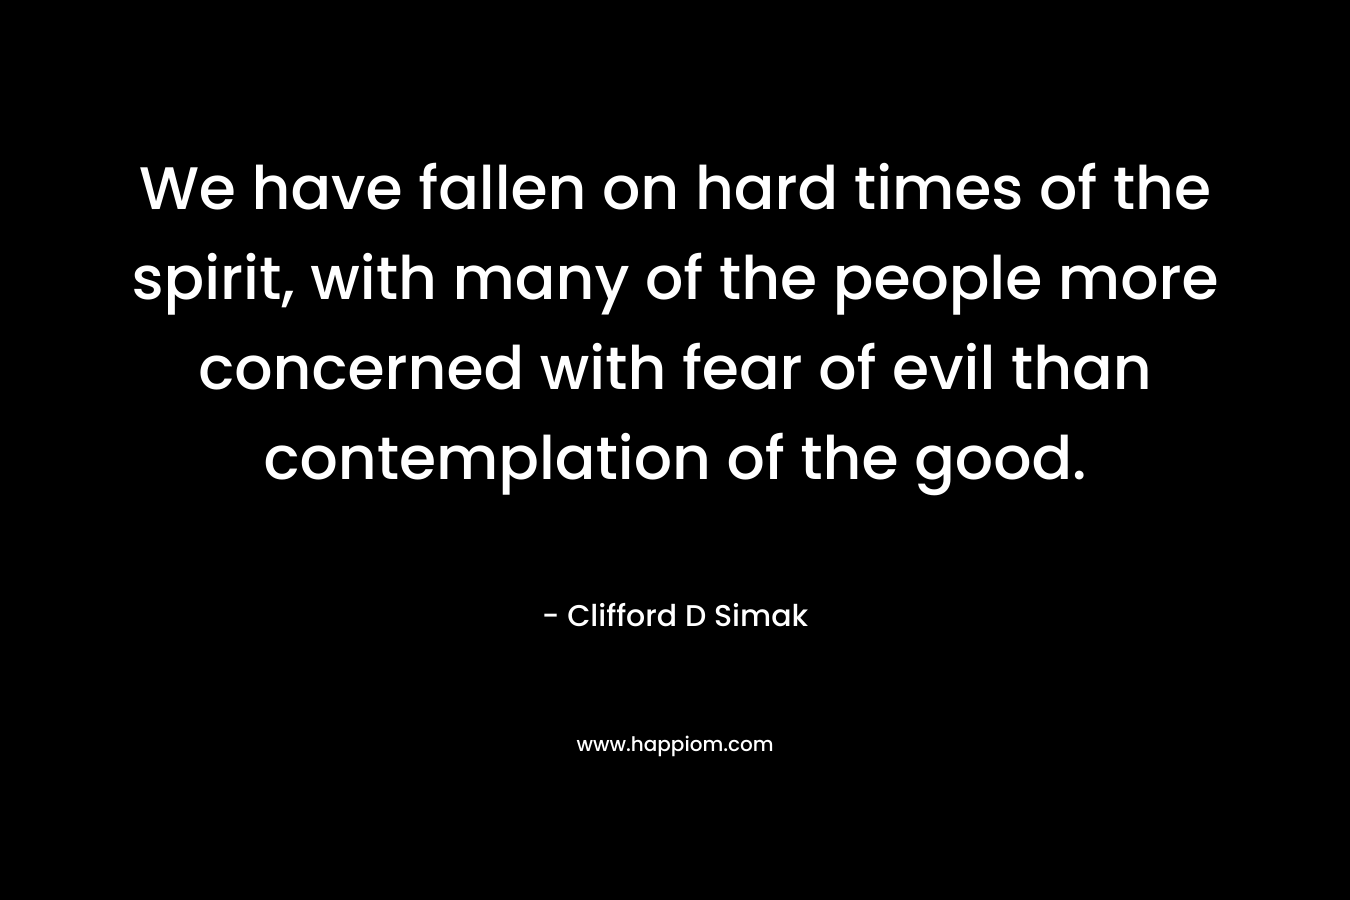 We have fallen on hard times of the spirit, with many of the people more concerned with fear of evil than contemplation of the good.